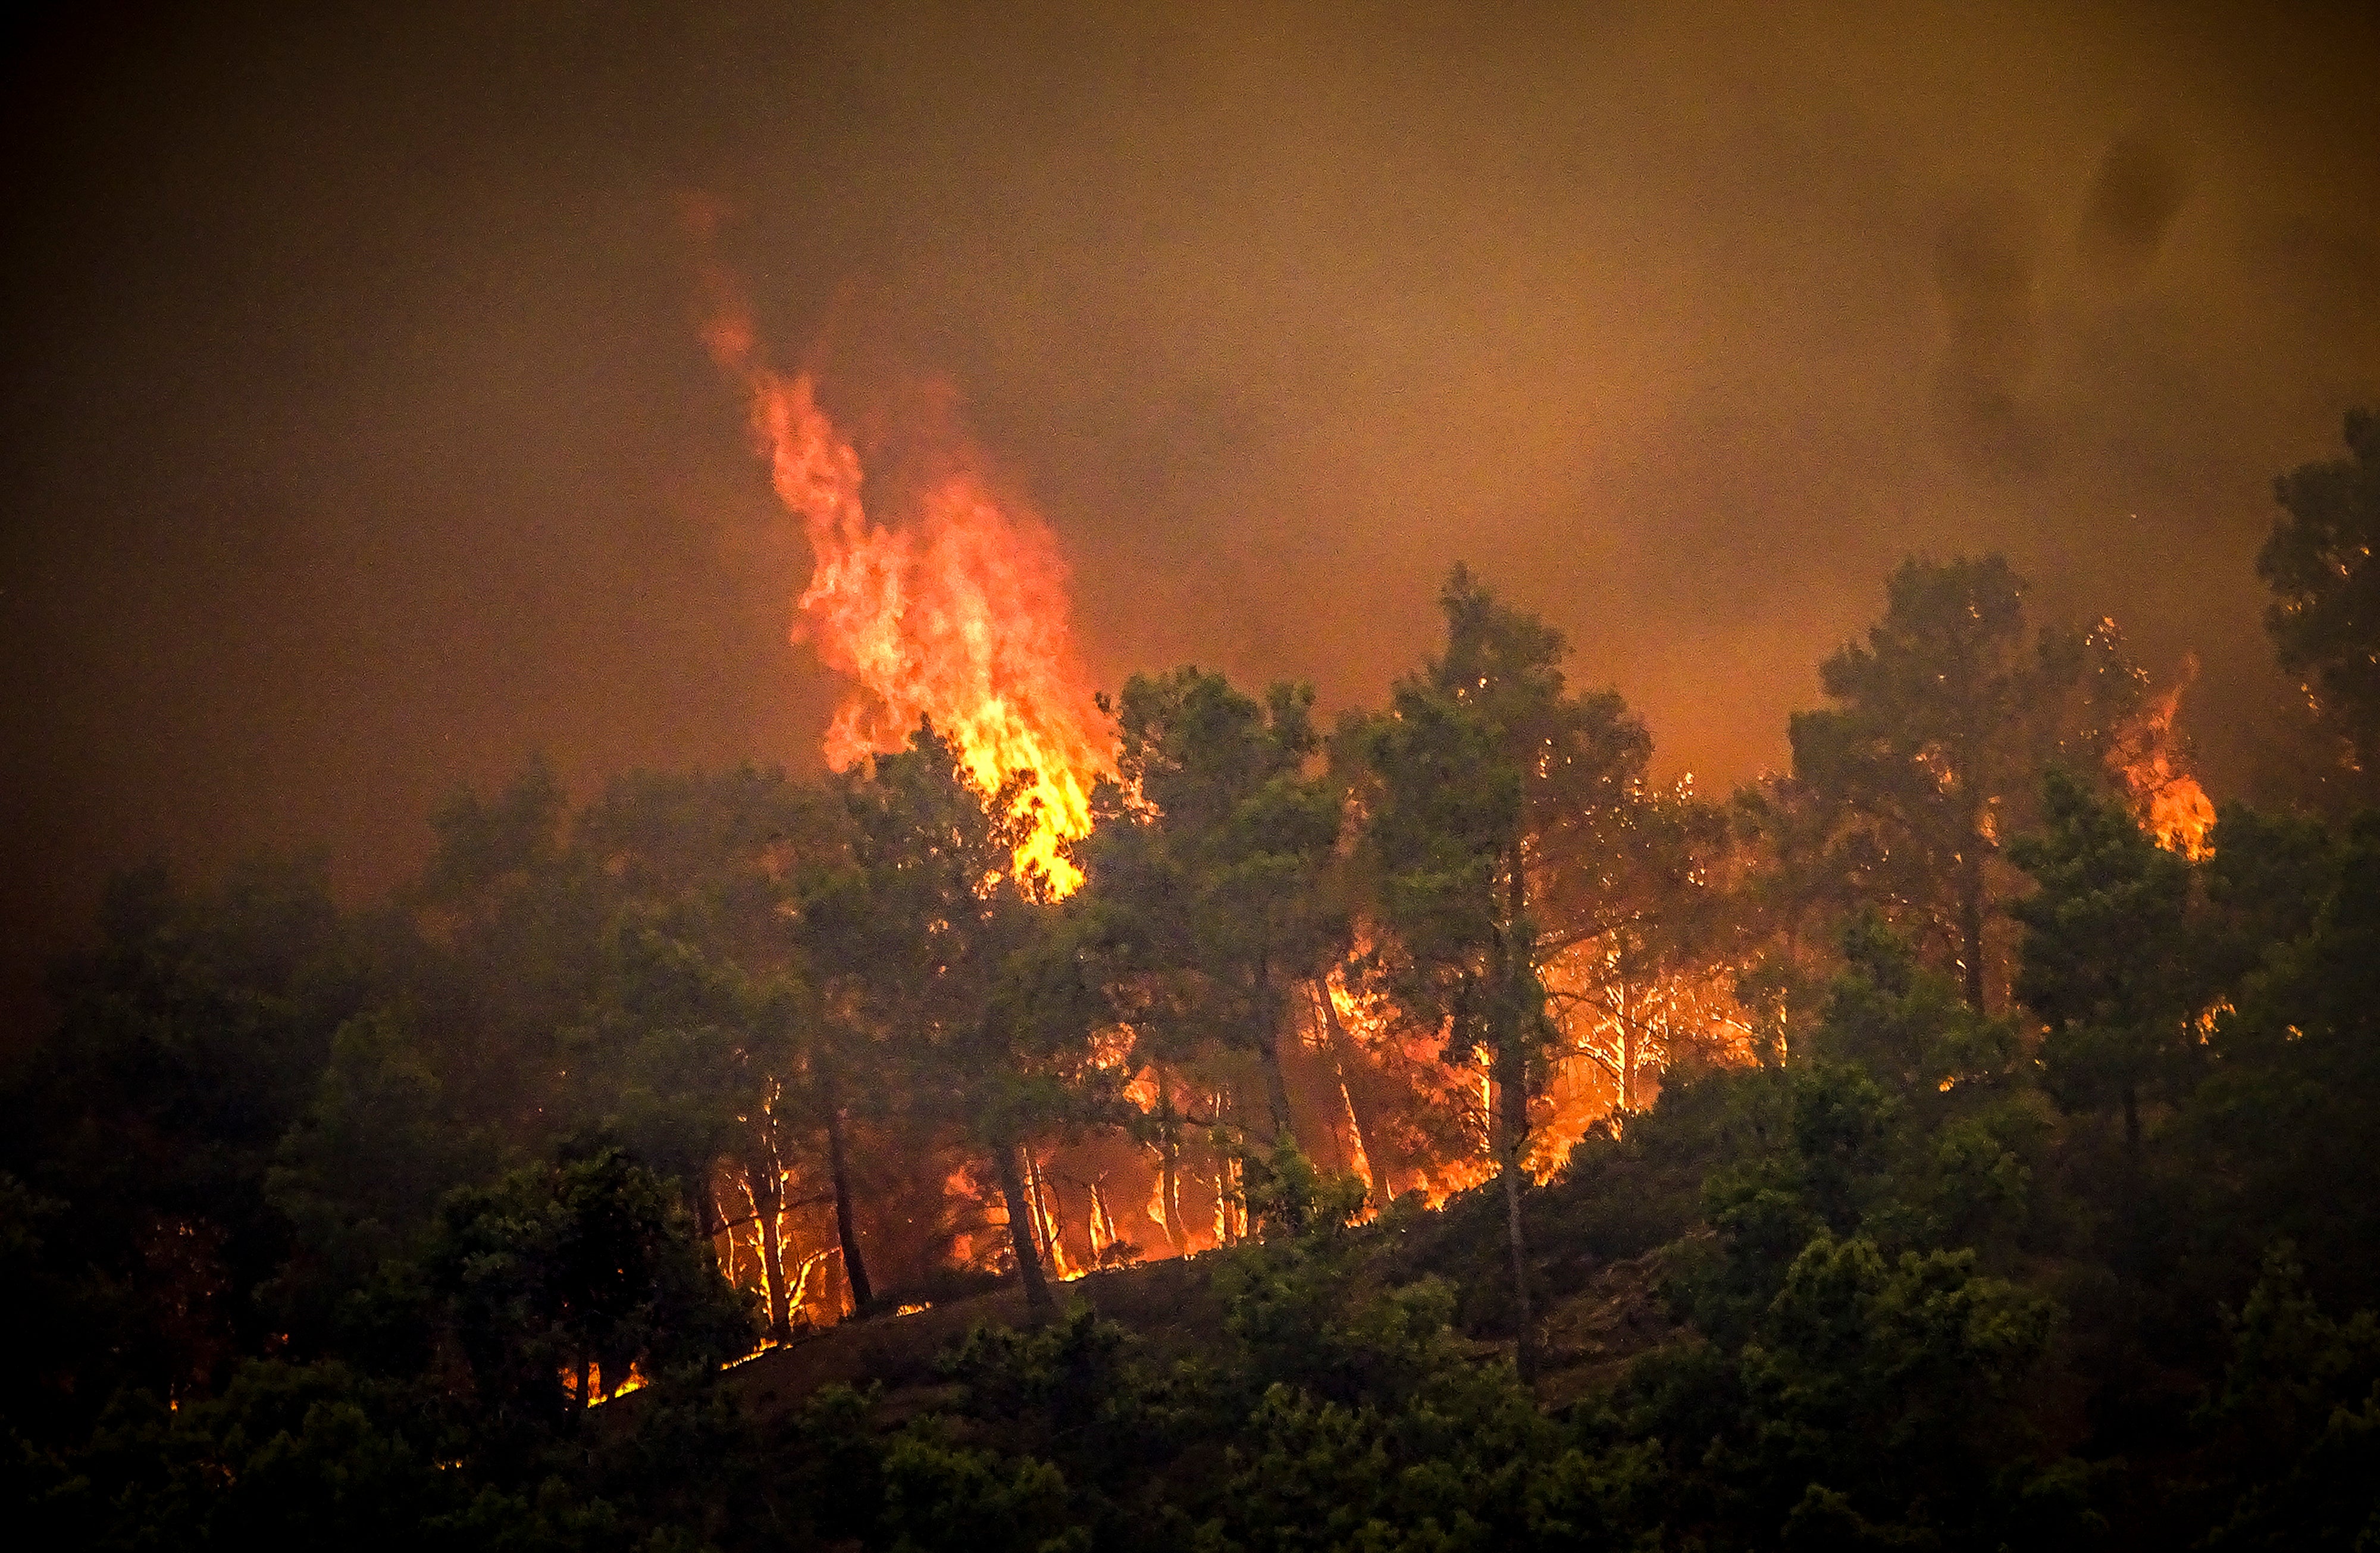 Flames rise during a forest fire on the island of Rhodes in Greece